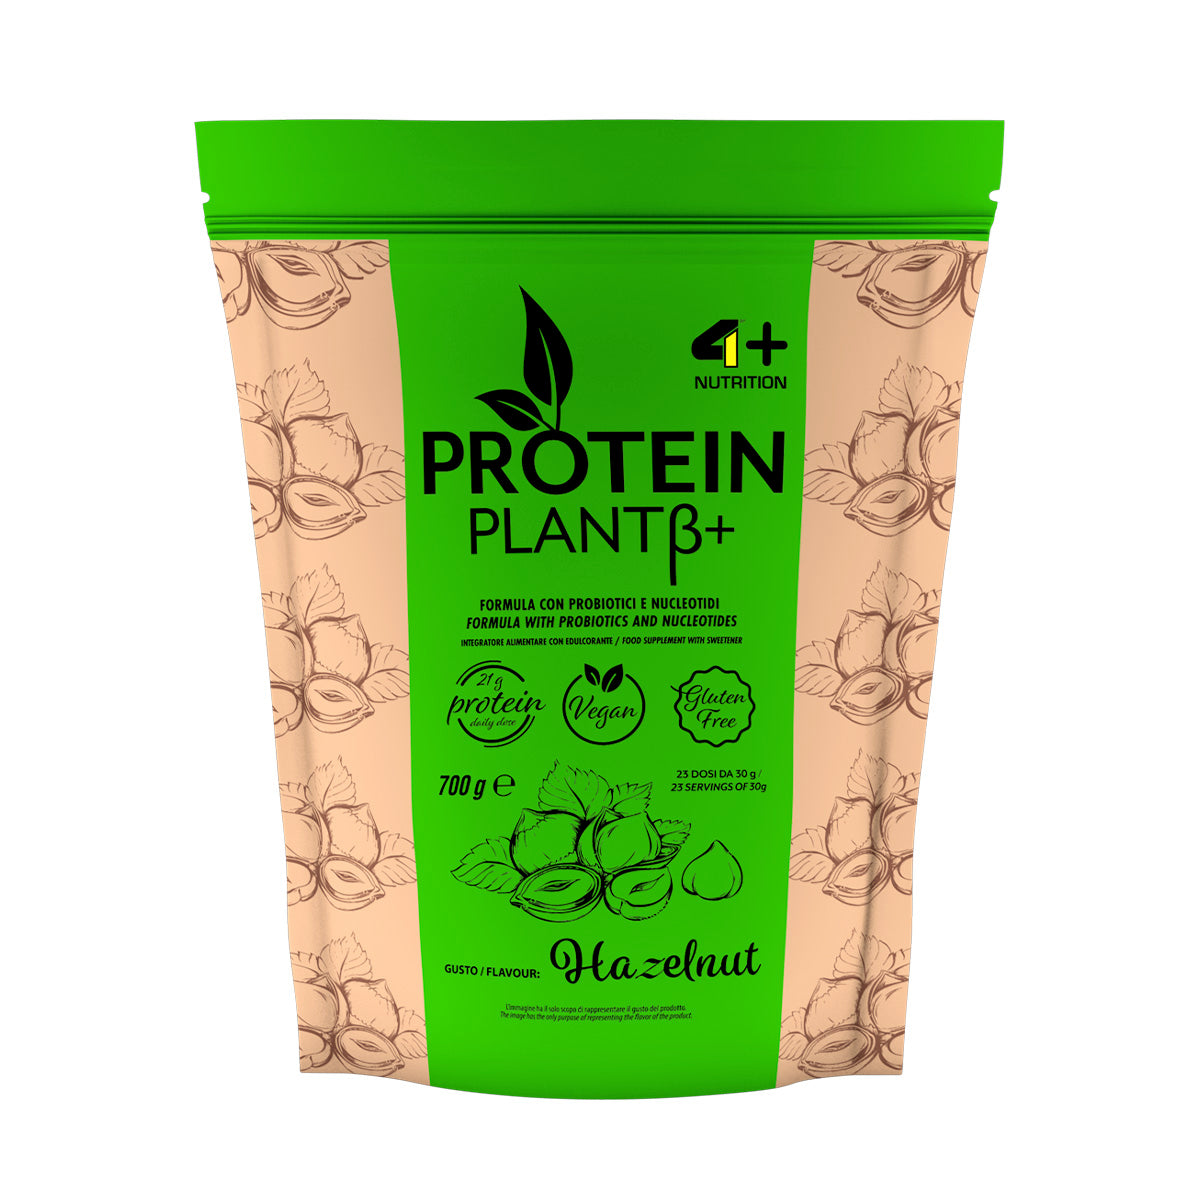 4+ PROTEIN PLANT B + Nutrition